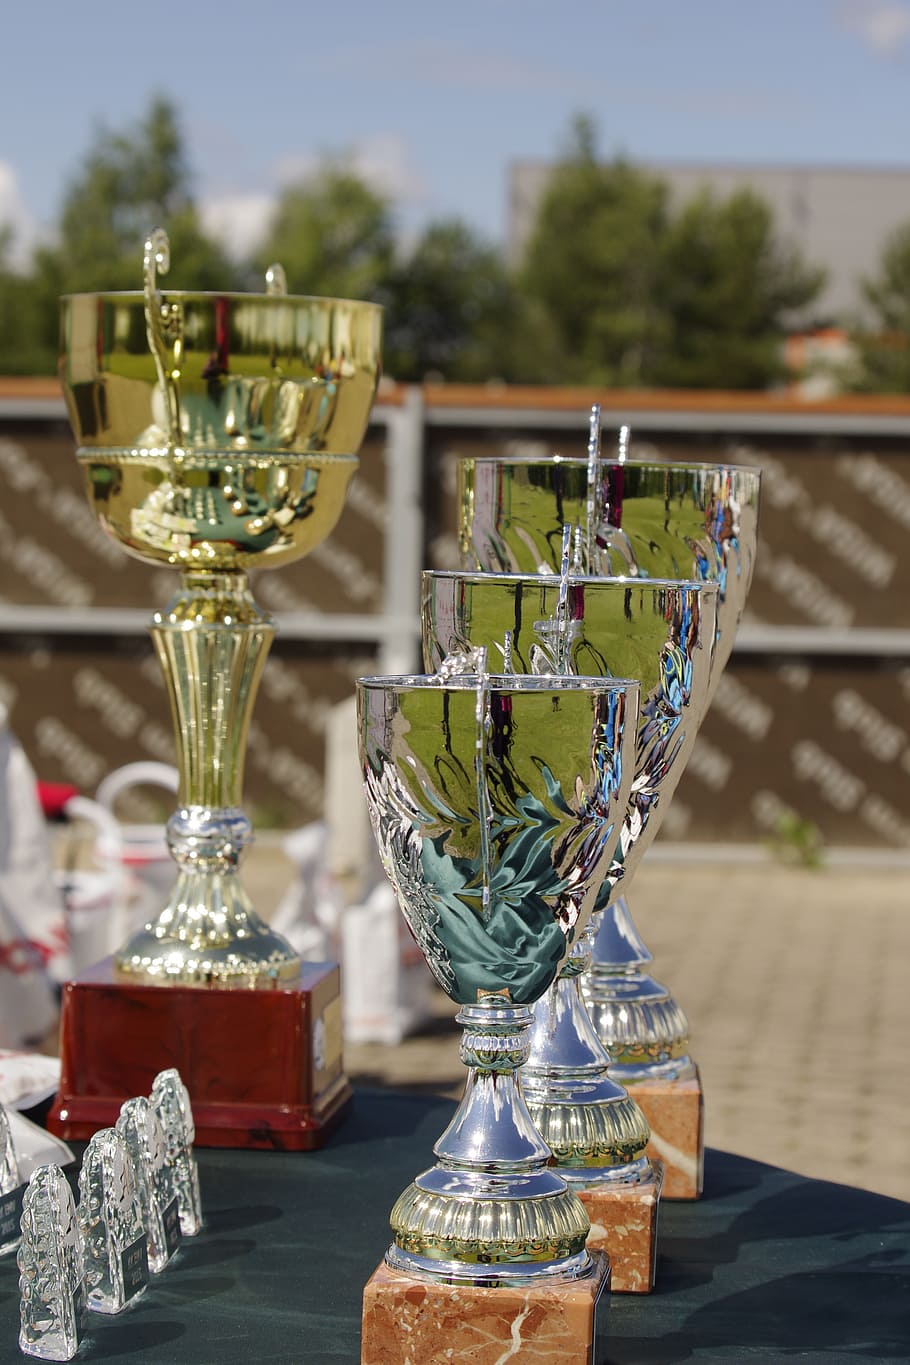 gold-colored trophies, prize, competition, trophy, award, achievement, success, focus on foreground, winning, day